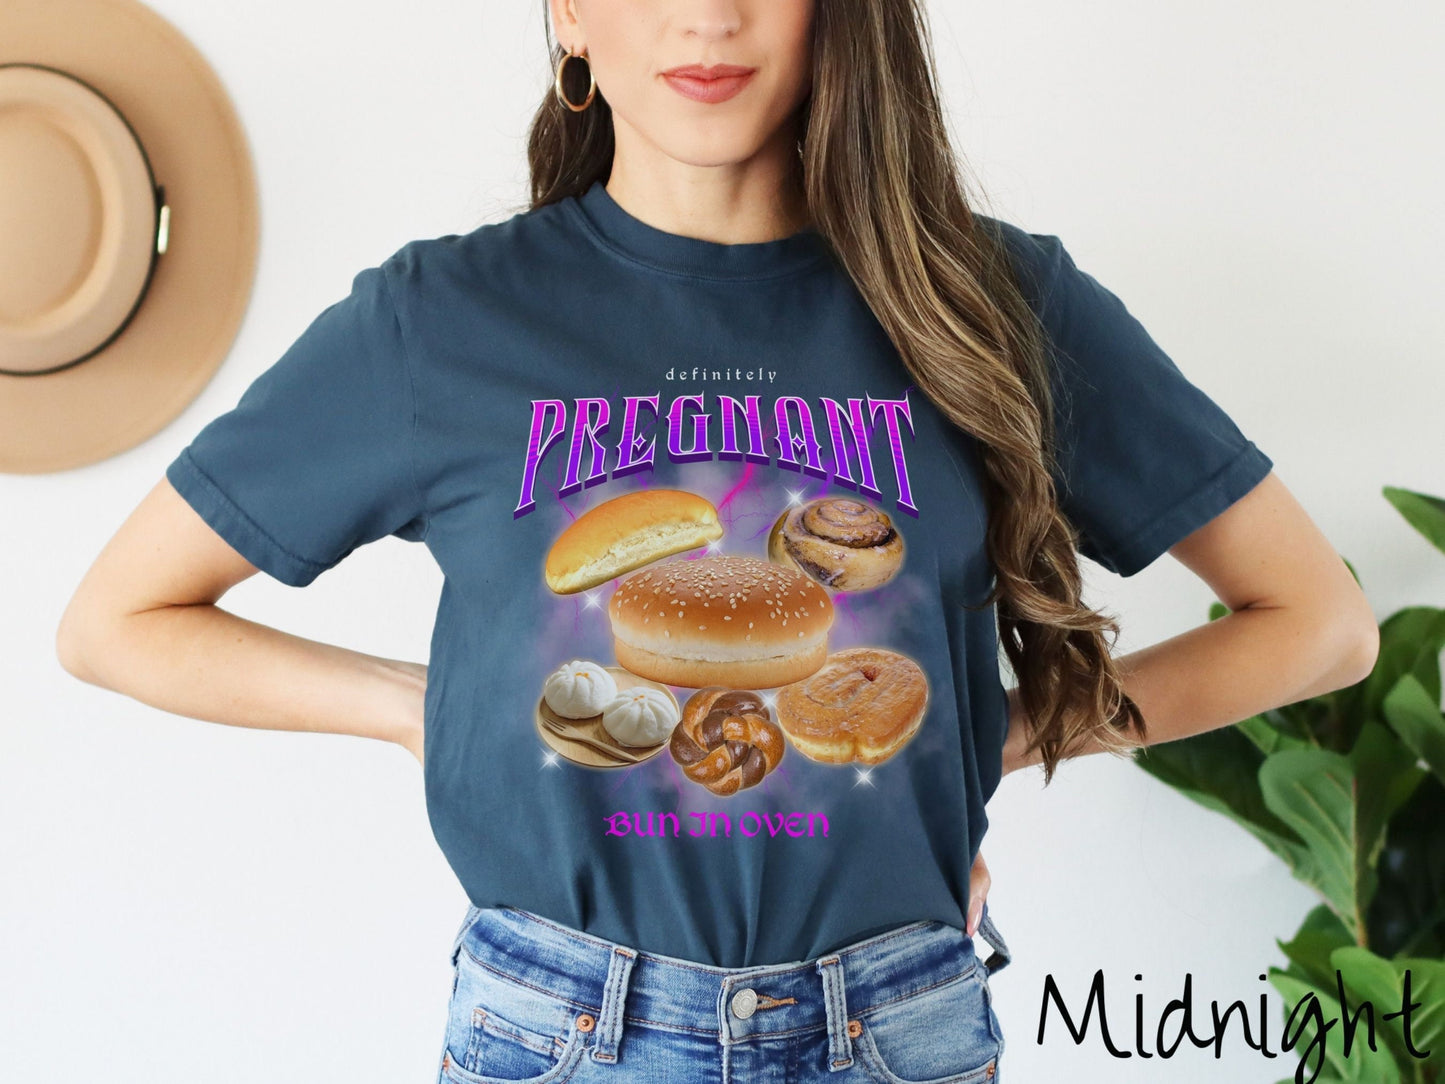 A woman wearing a vintage, midnight colored Comfort Colors t-shirt with the text Definitely Pregnant Bun In Oven in purple font. Between the text are different breads like hamburger and hotdog buns, cinnamon rolls, and donuts.